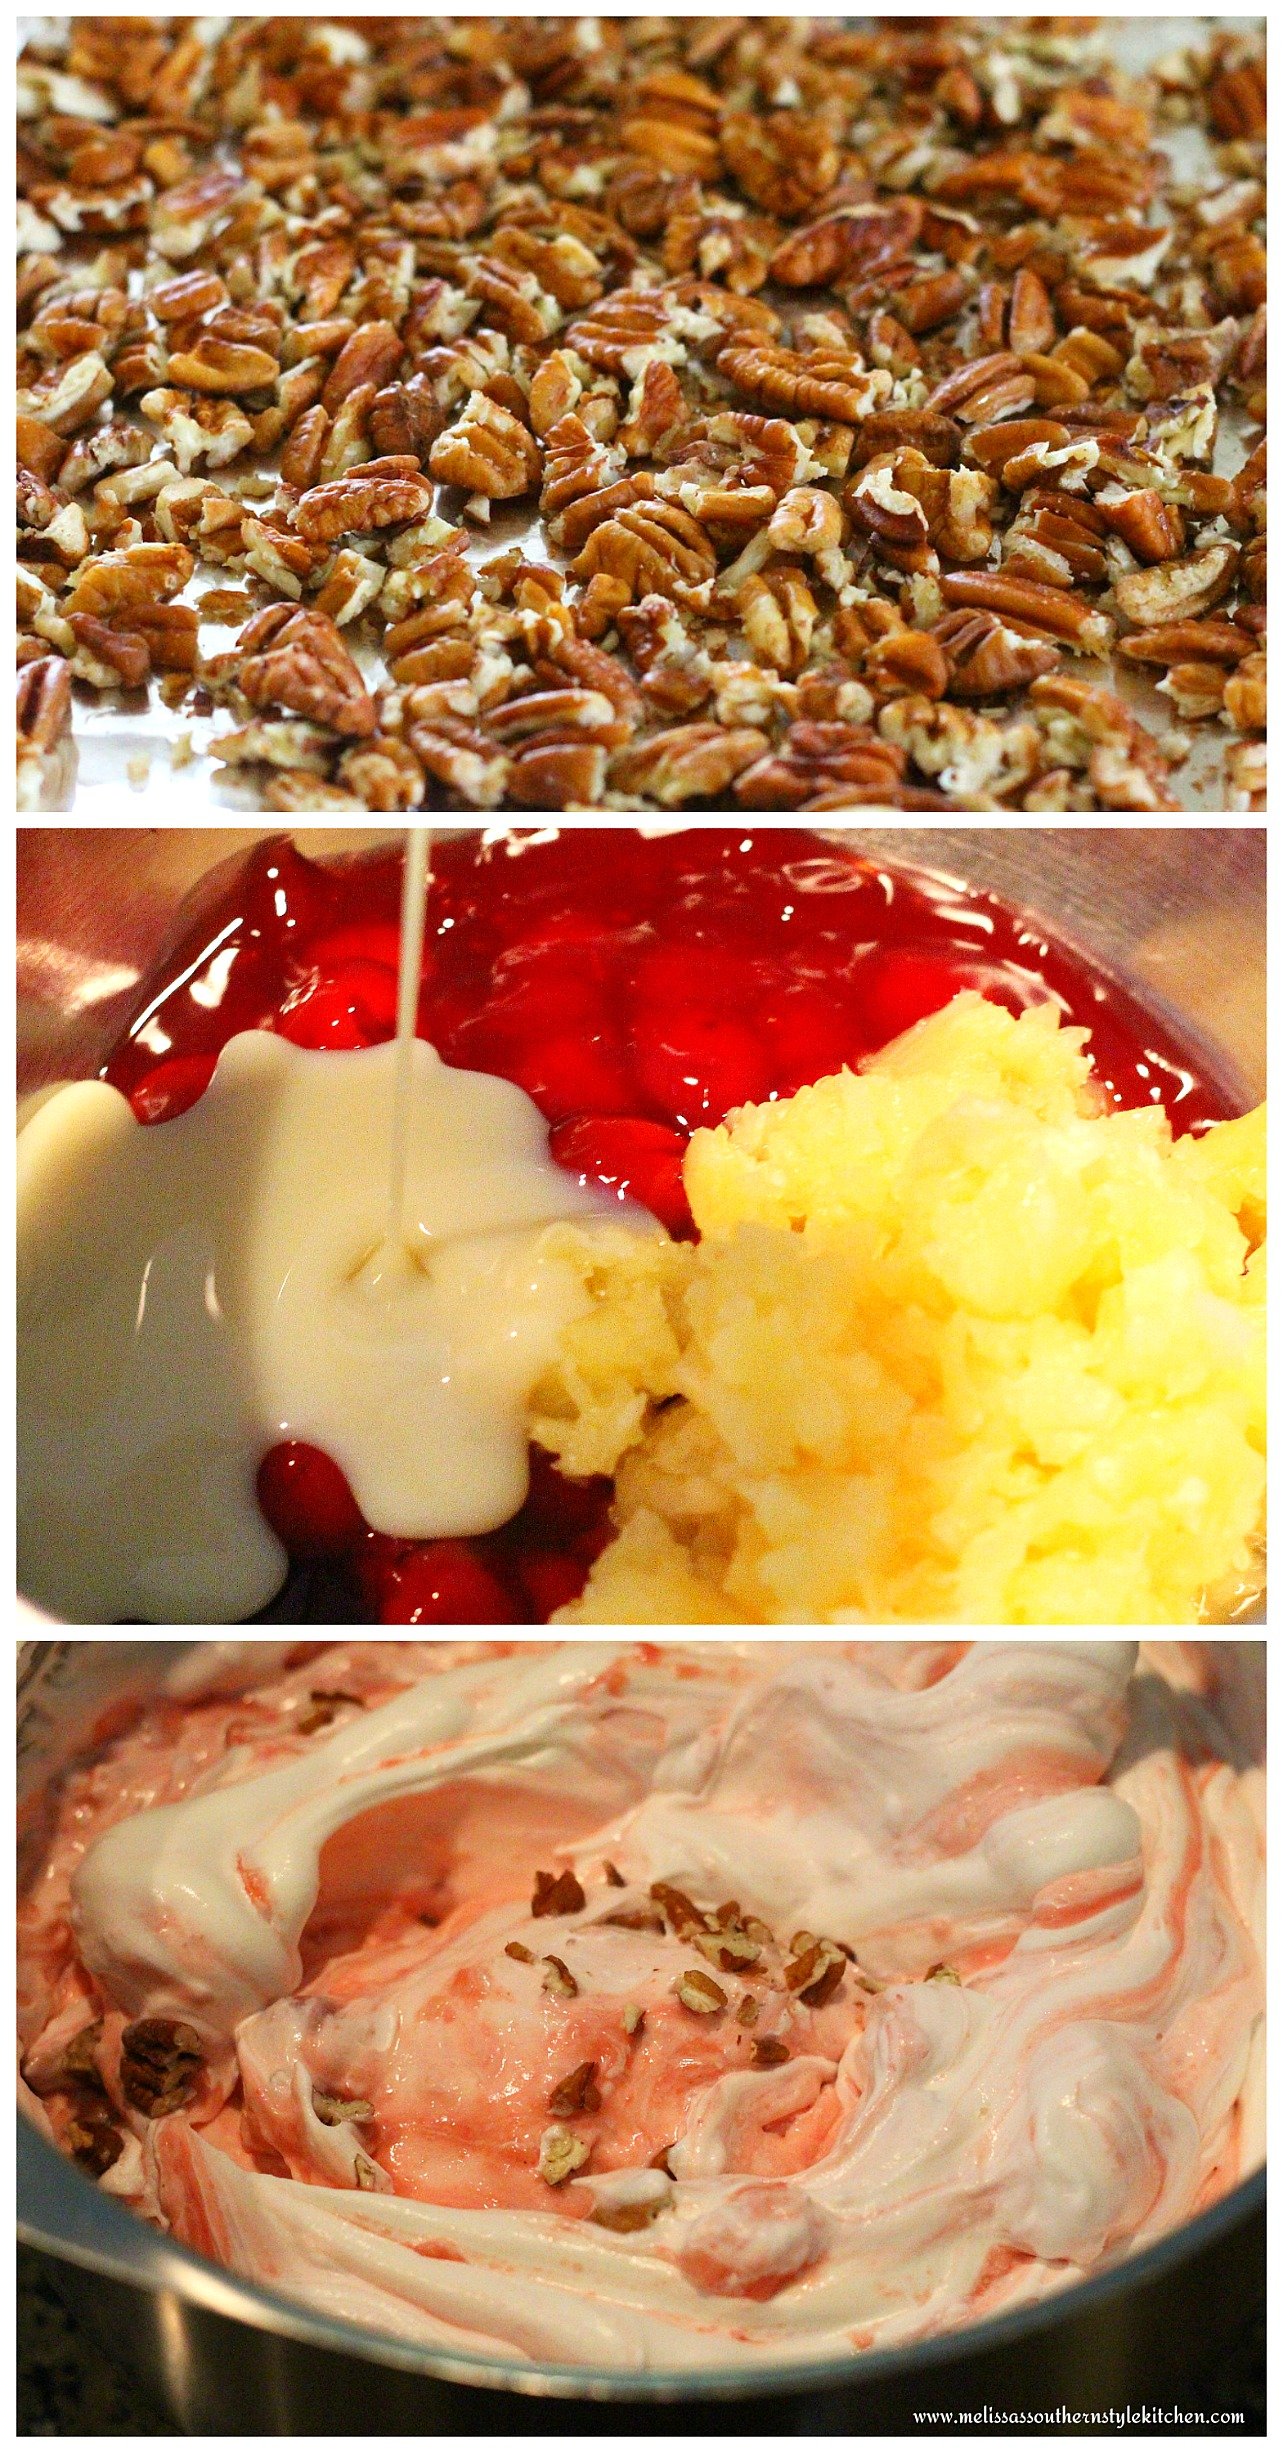 ingredients and step-by-step images to prepare fluff